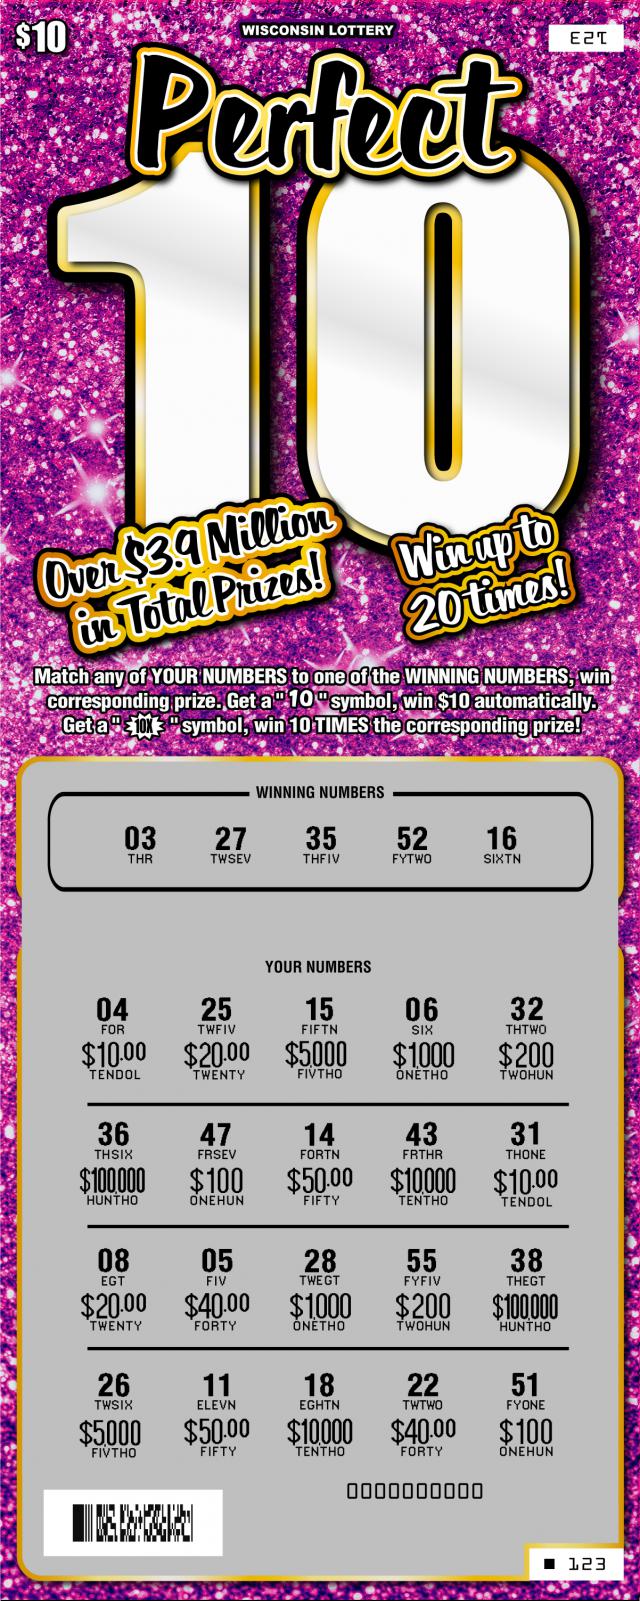 Perfect 10 instant scratch ticket from Wisconsin Lottery - unscratched